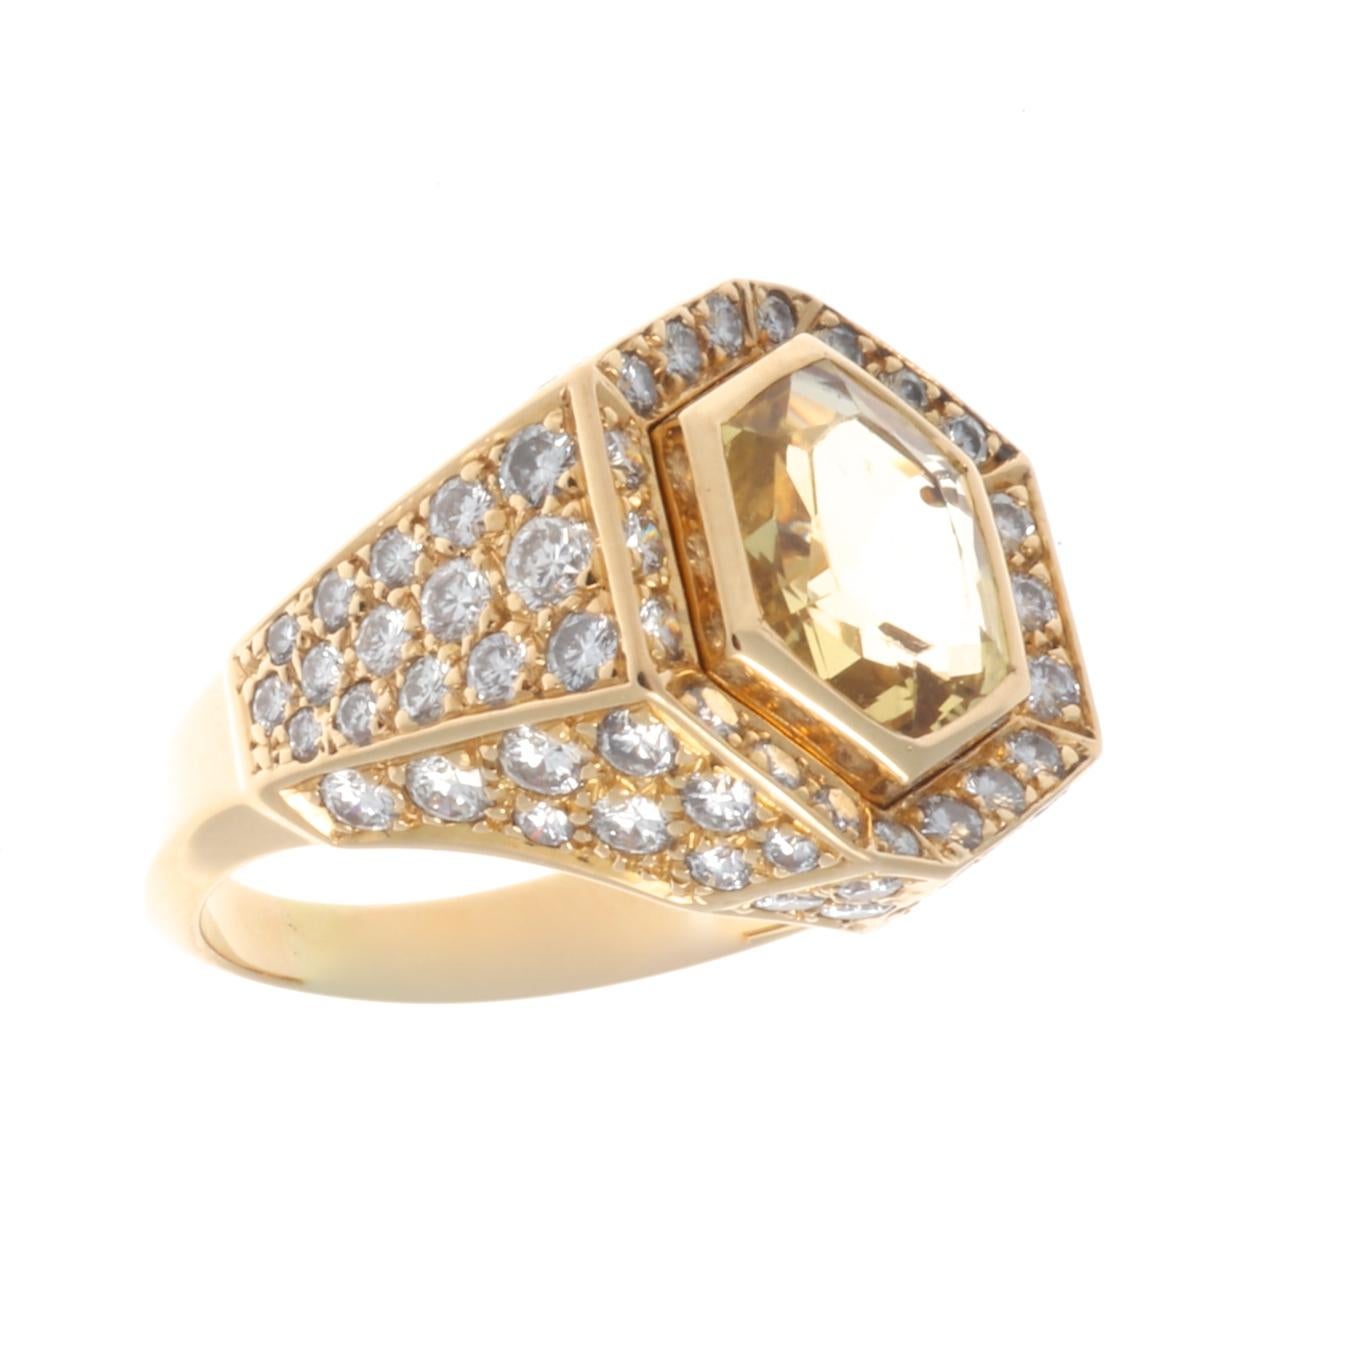 Cartier's never ending journey of excellence. Featuring an approximately 3.50 carat no heat yellow Ceylon sapphire that is crowned by a tiara of diamonds. Crafted in 18k yellow gold. Signed Cartier and numbered. Ring size 6-1/4 and can easily be